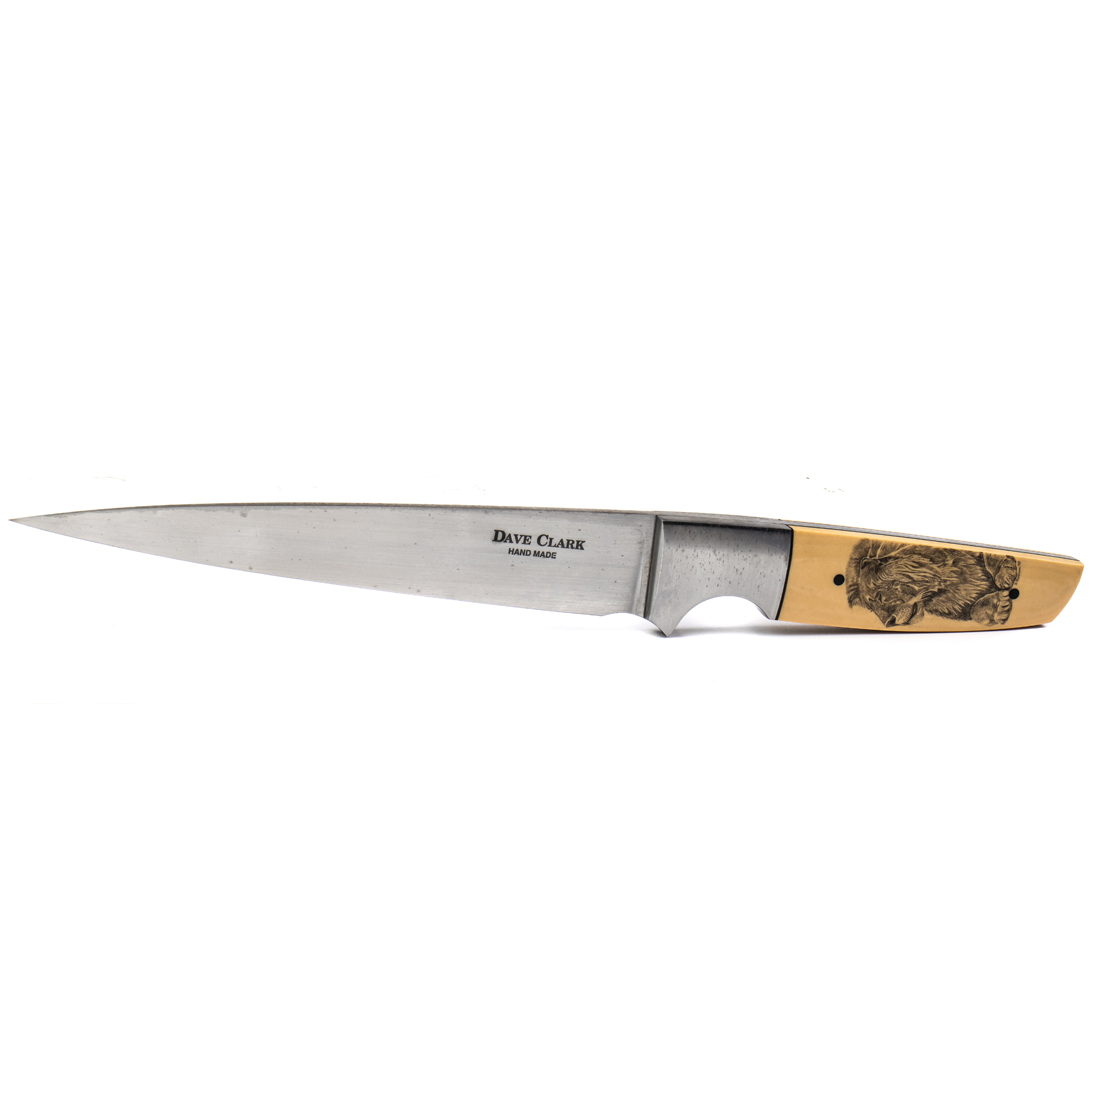 DAVE CLARK KNIFE FITTED WITH A 2d2f7c